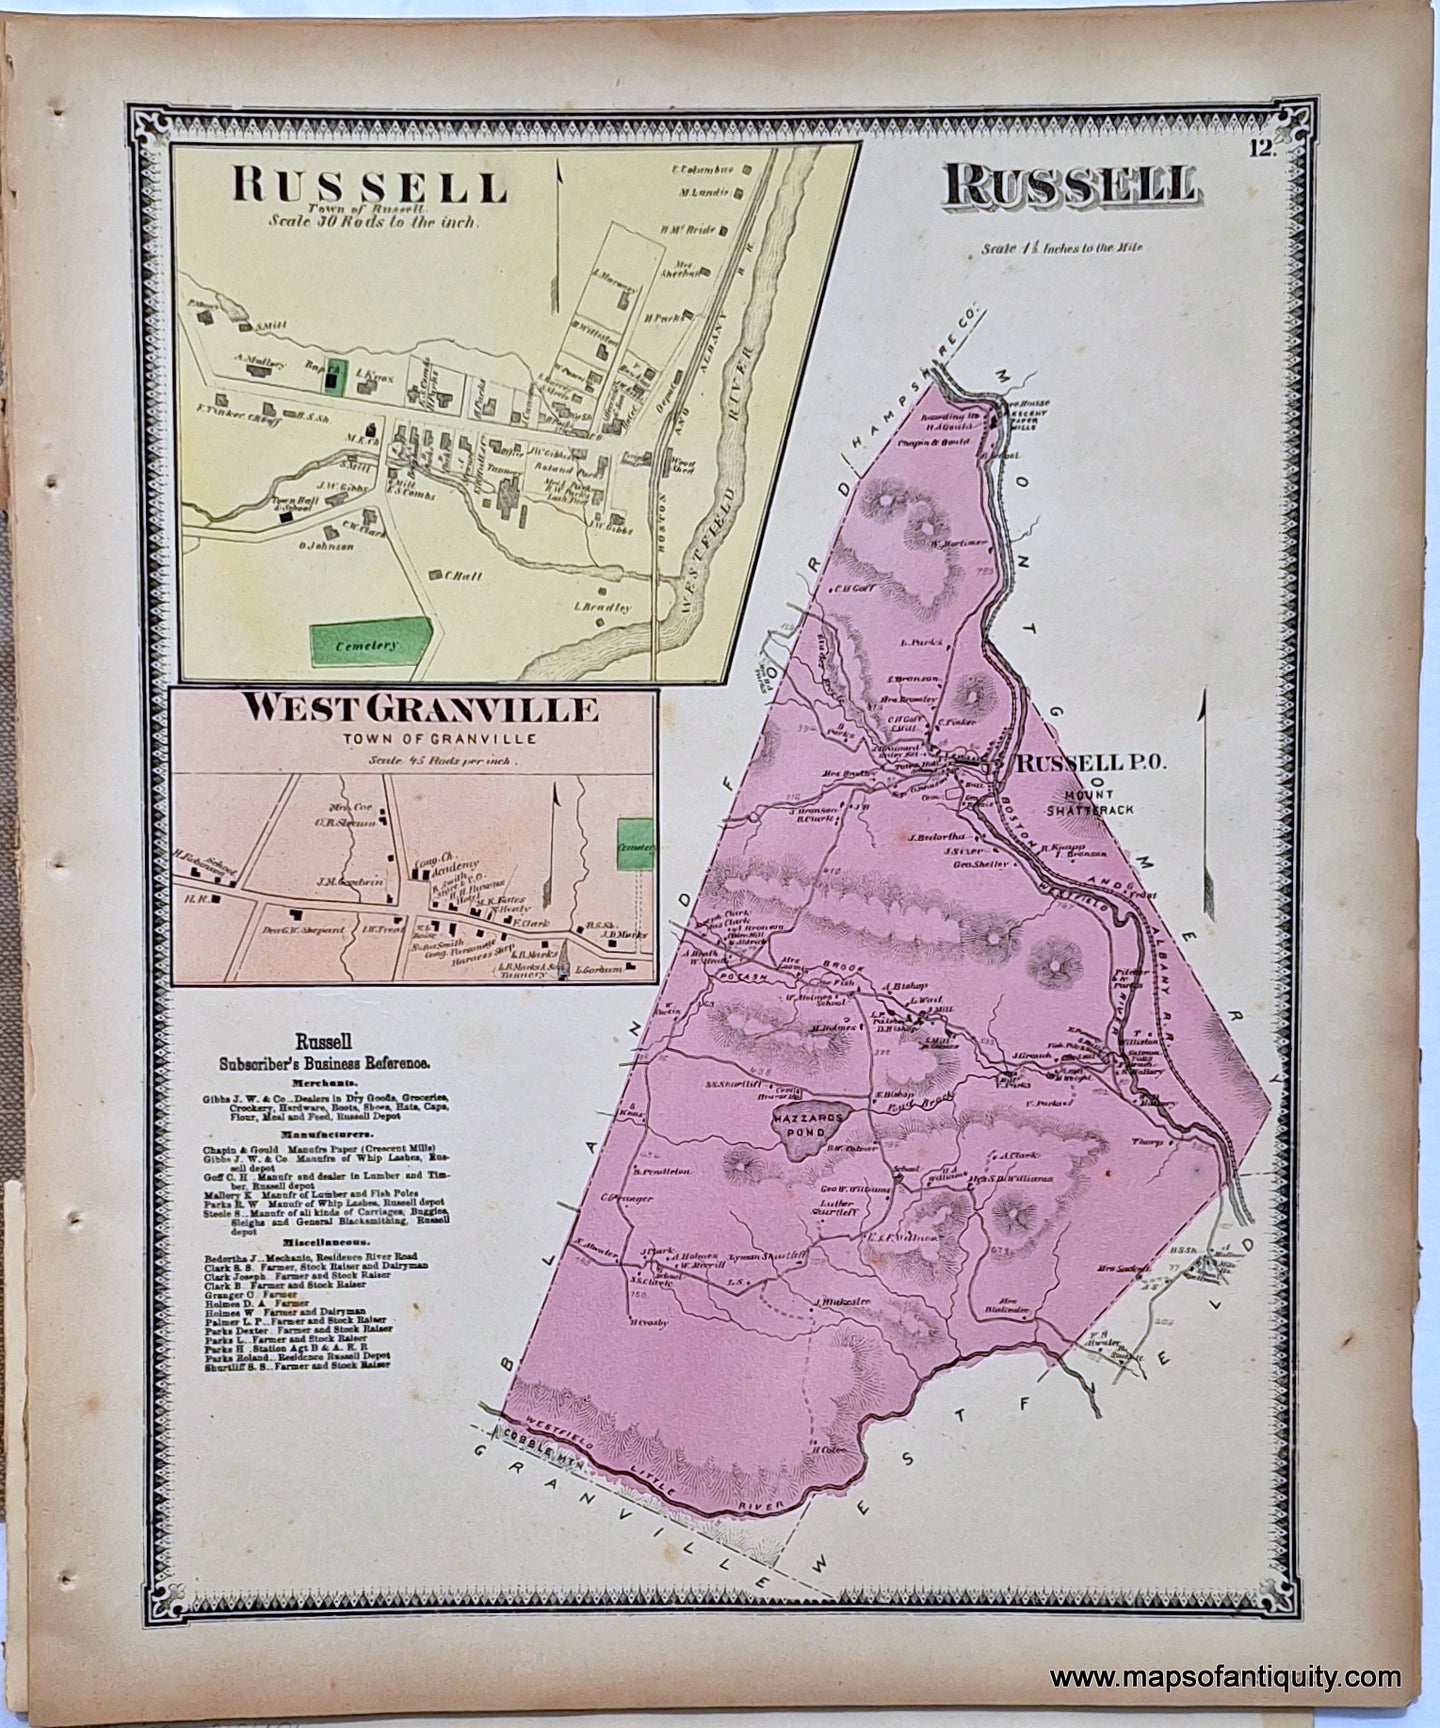 Antique-Hand-Colored-Map-Russell-West-Granville-p.-12-(MA)-Massachusetts-Hampden-County-1870-Beers-Ellis-and-Soule-Maps-Of-Antiquity